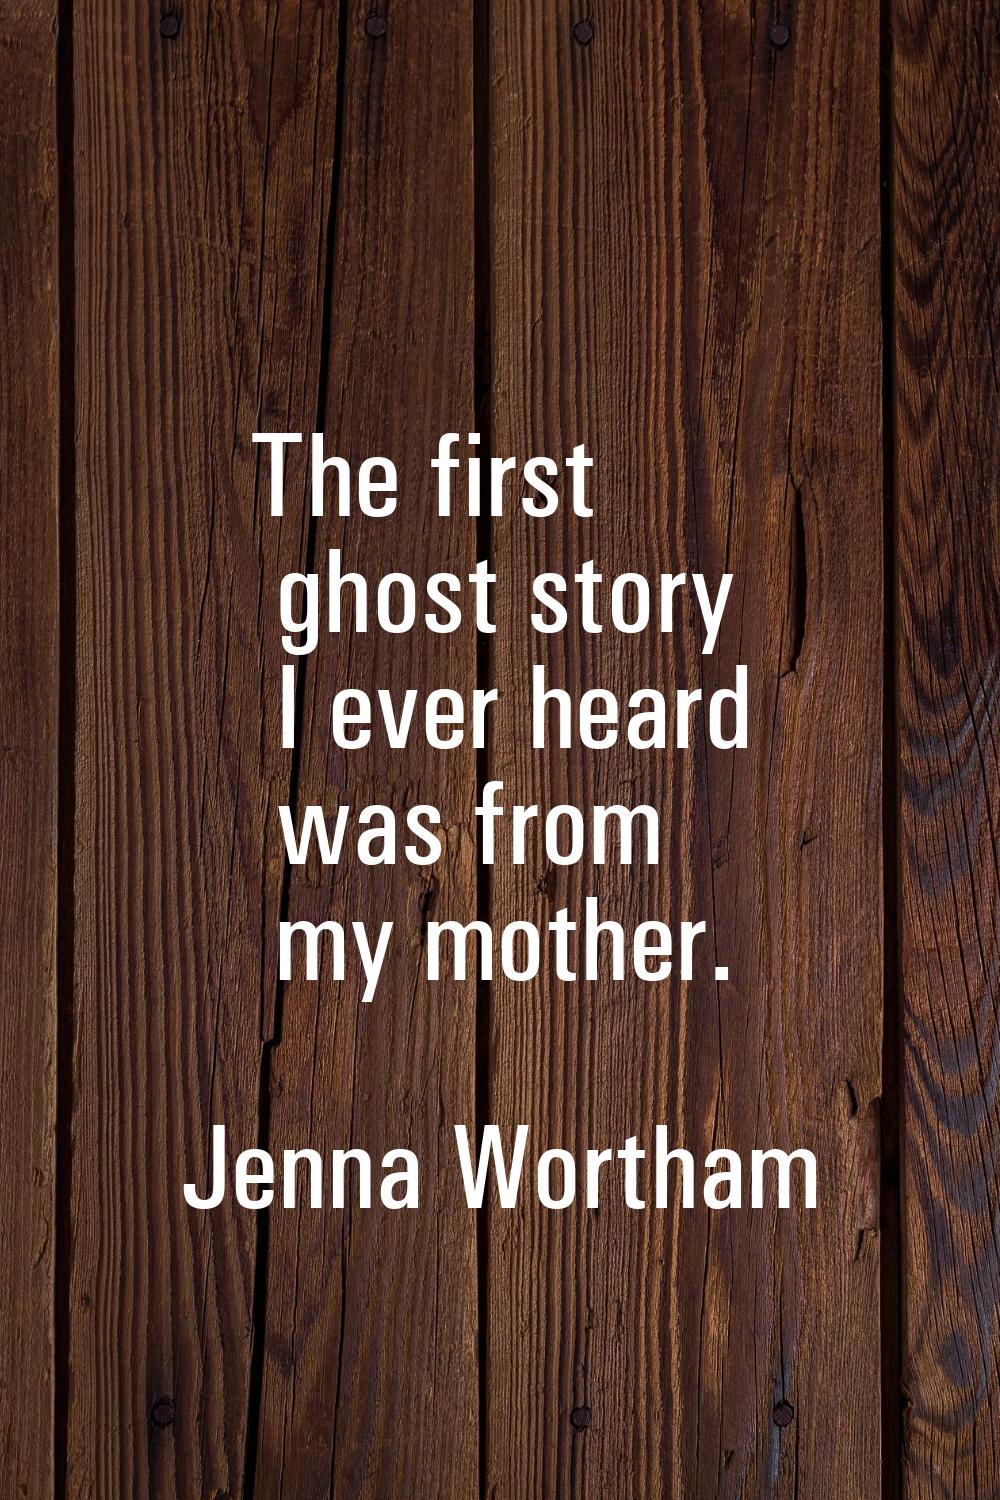 The first ghost story I ever heard was from my mother.